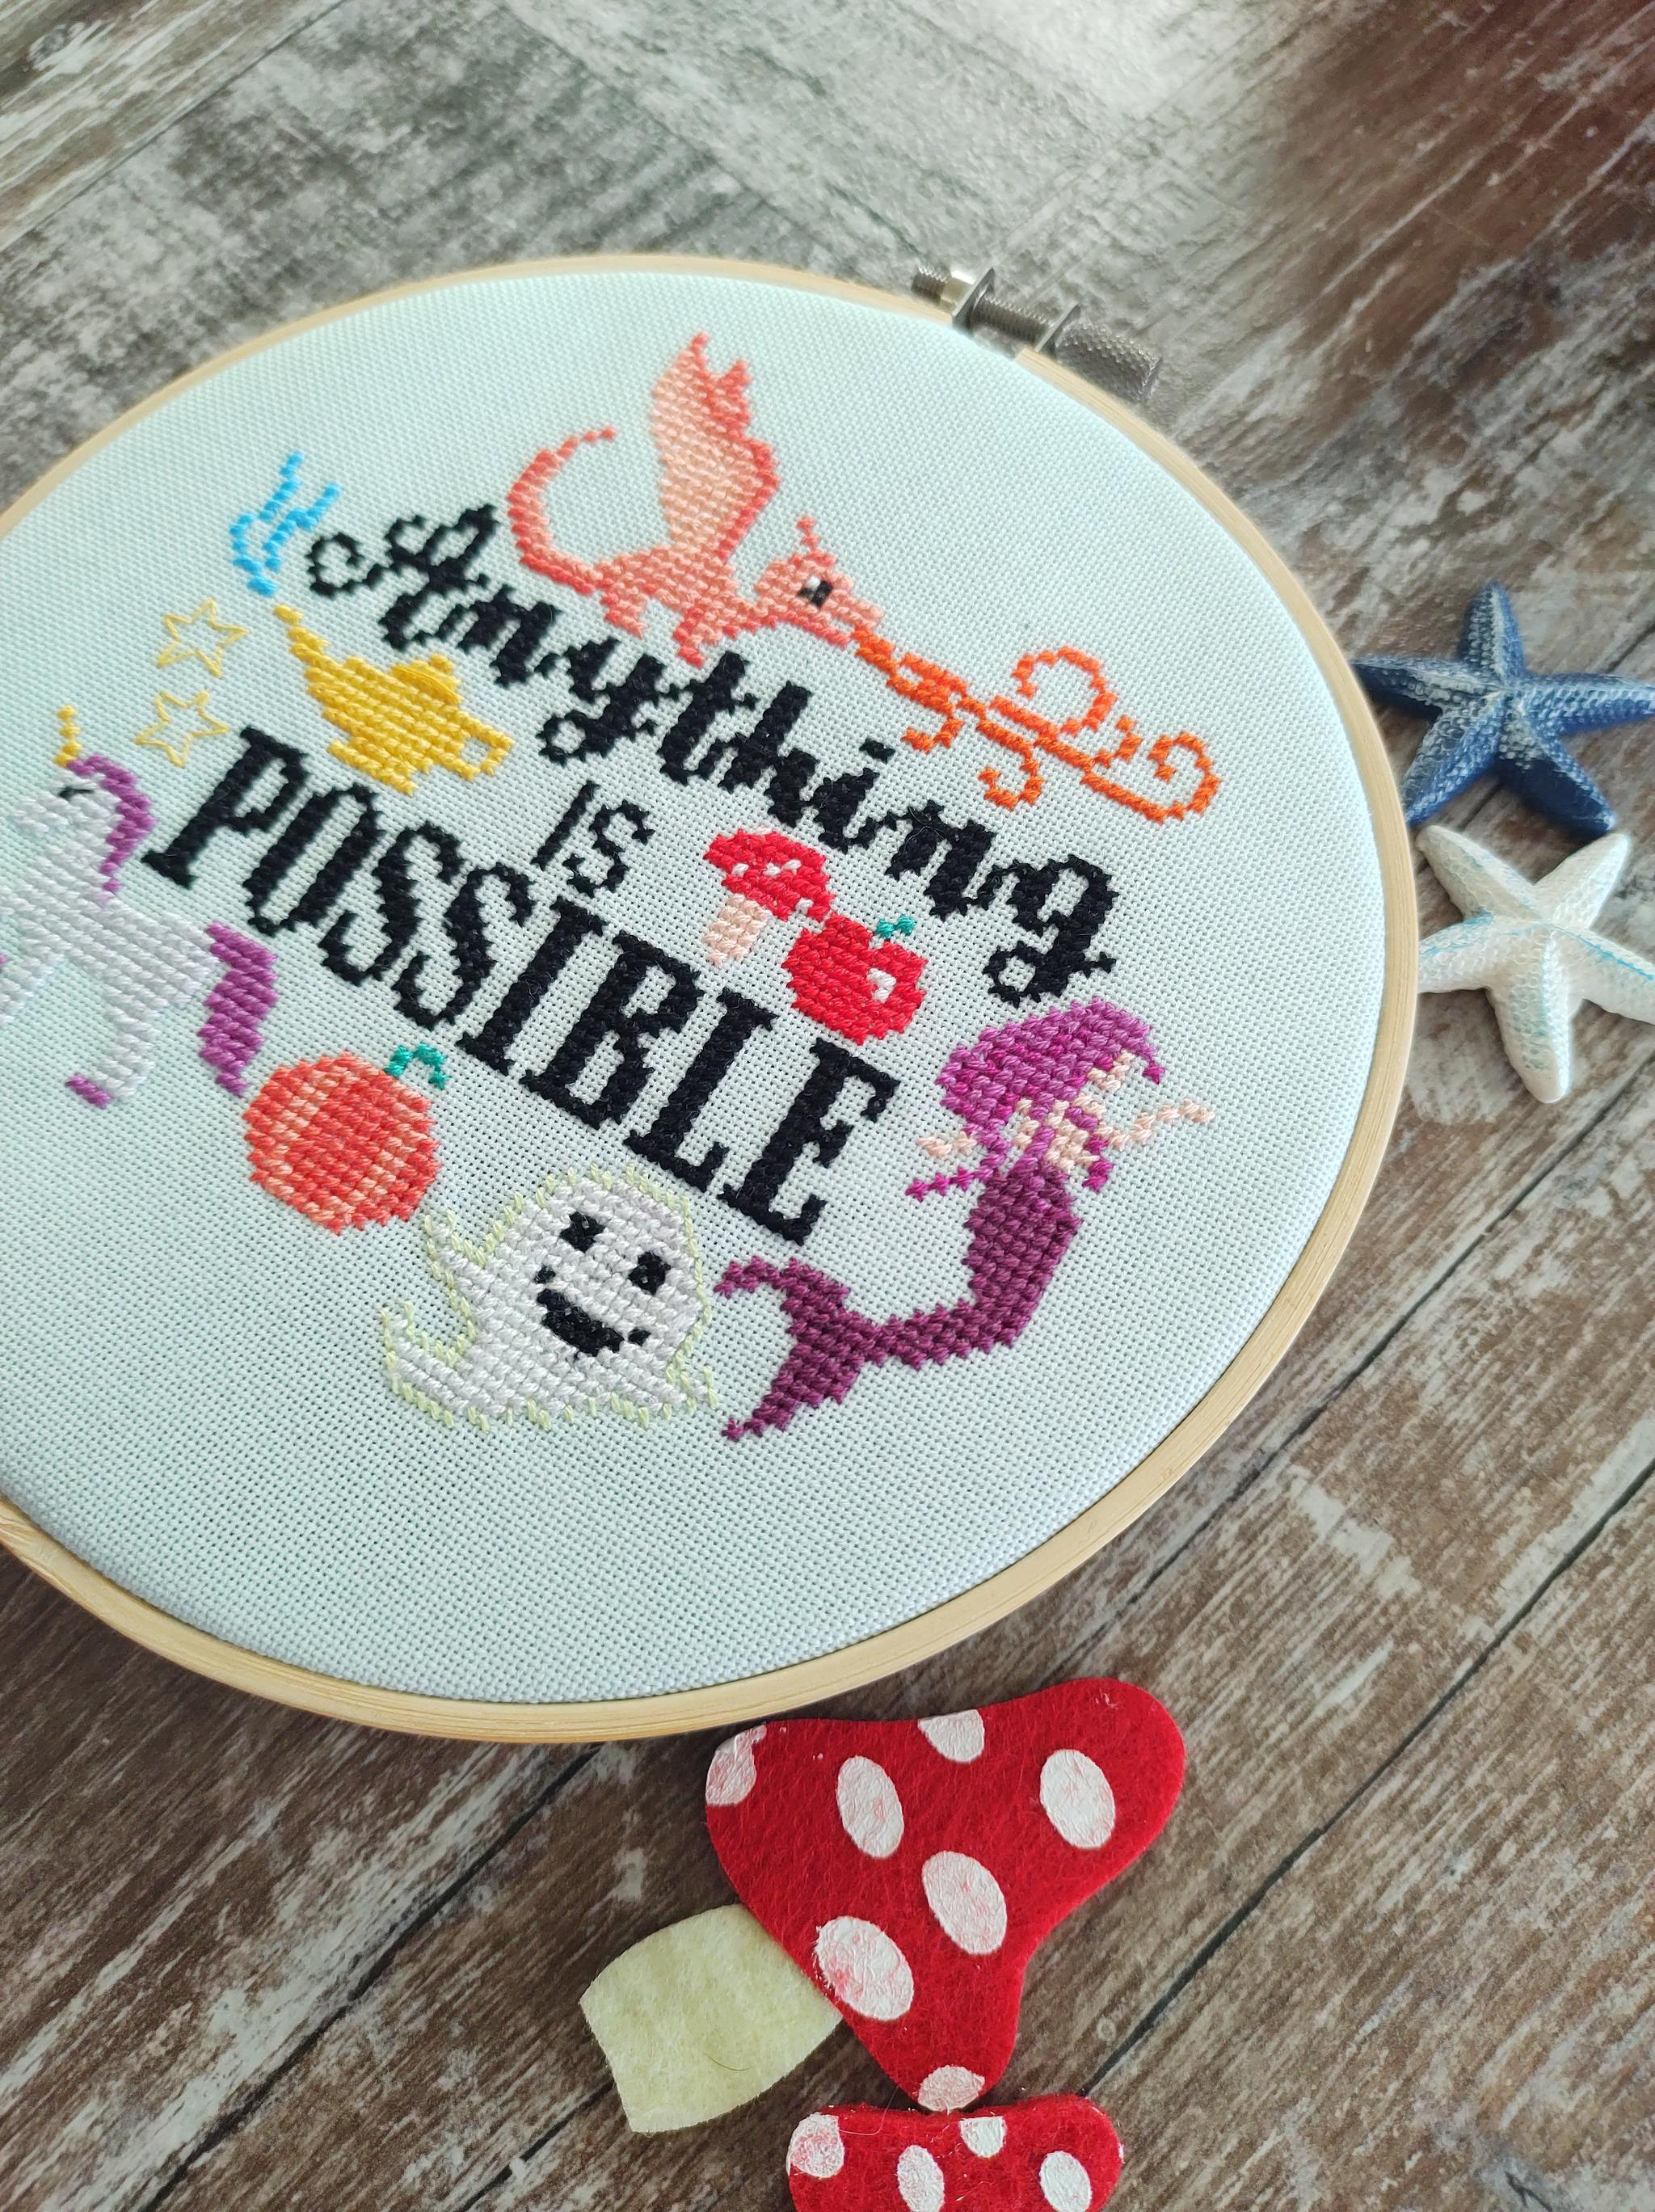 Anything is Possible - Cute Magical Cross Stitch Pattern